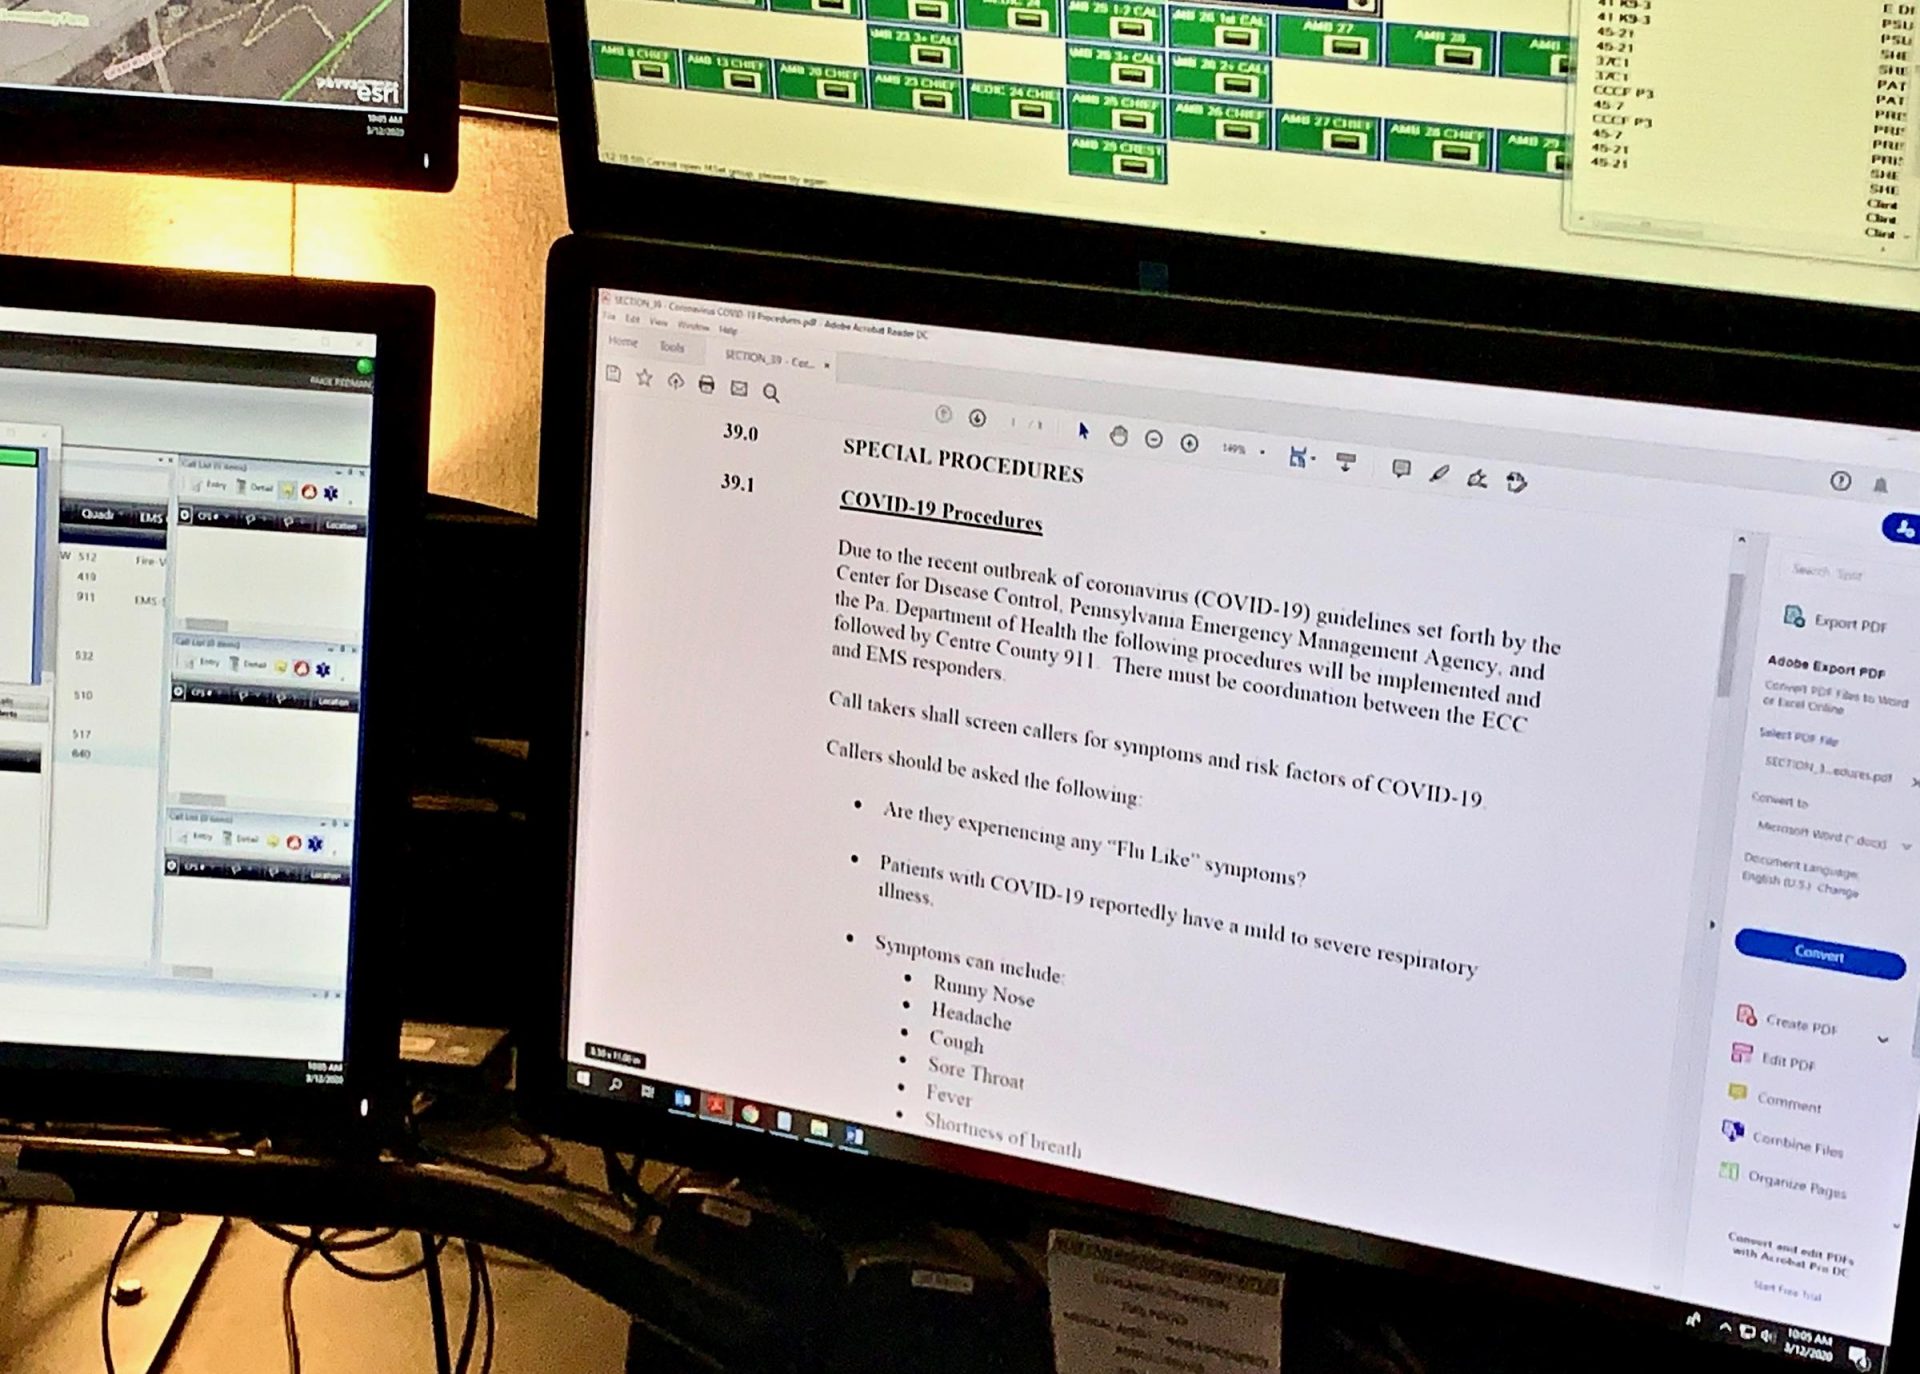 Emergency dispatchers have been trained to ask questions about people's symptoms to screen for possible COVID-19 cases.